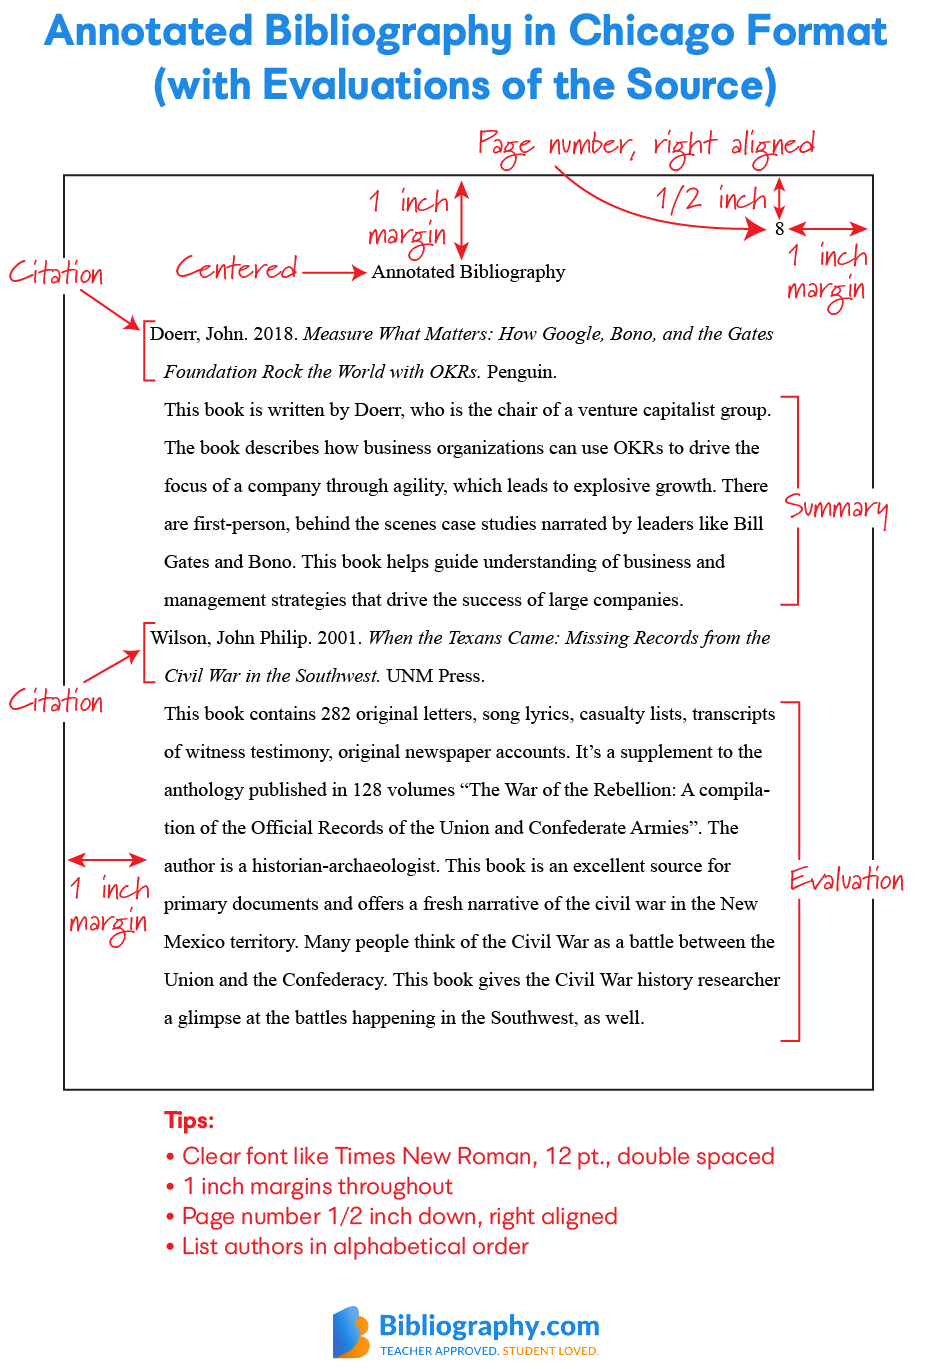 Annotated Bibliography Apa Format Template from cms.bibliography.com